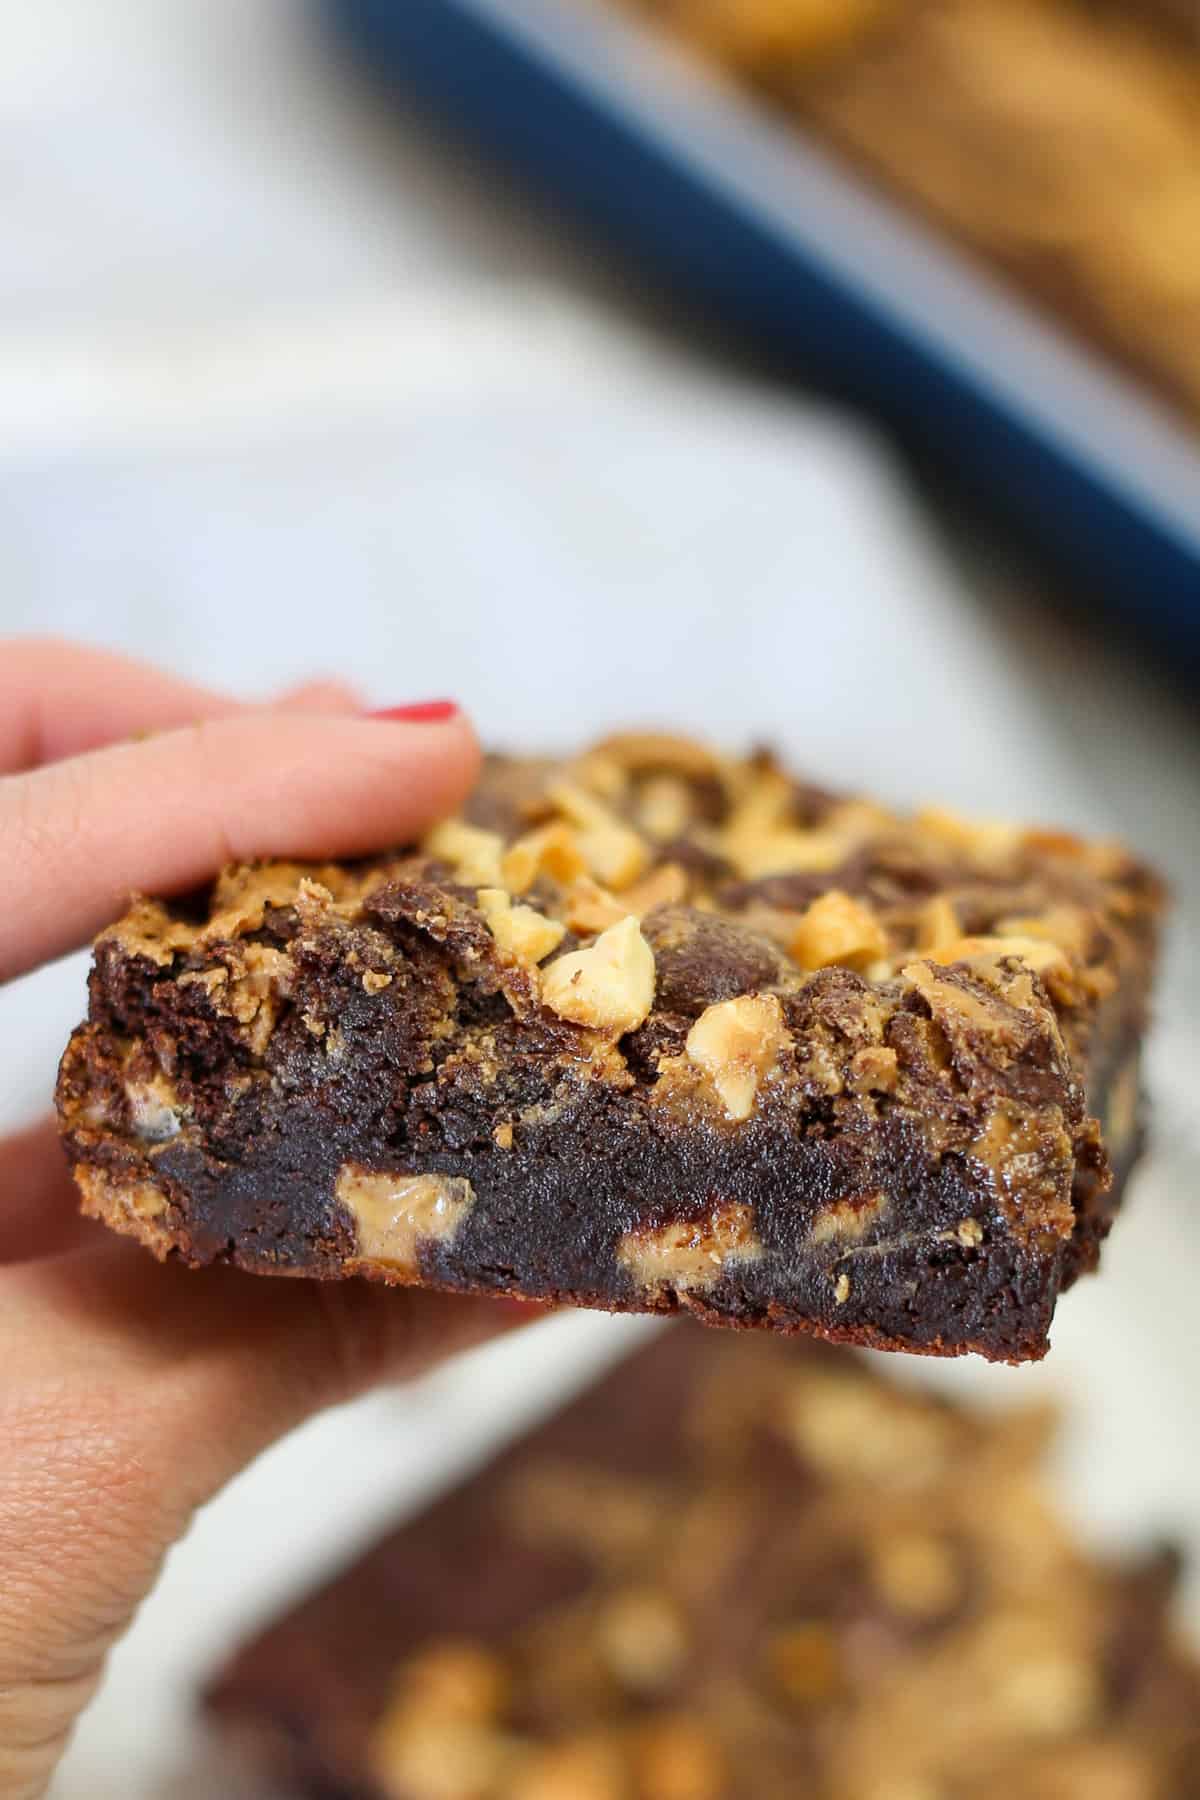 A hand holding a peanut butter swirl brownie.